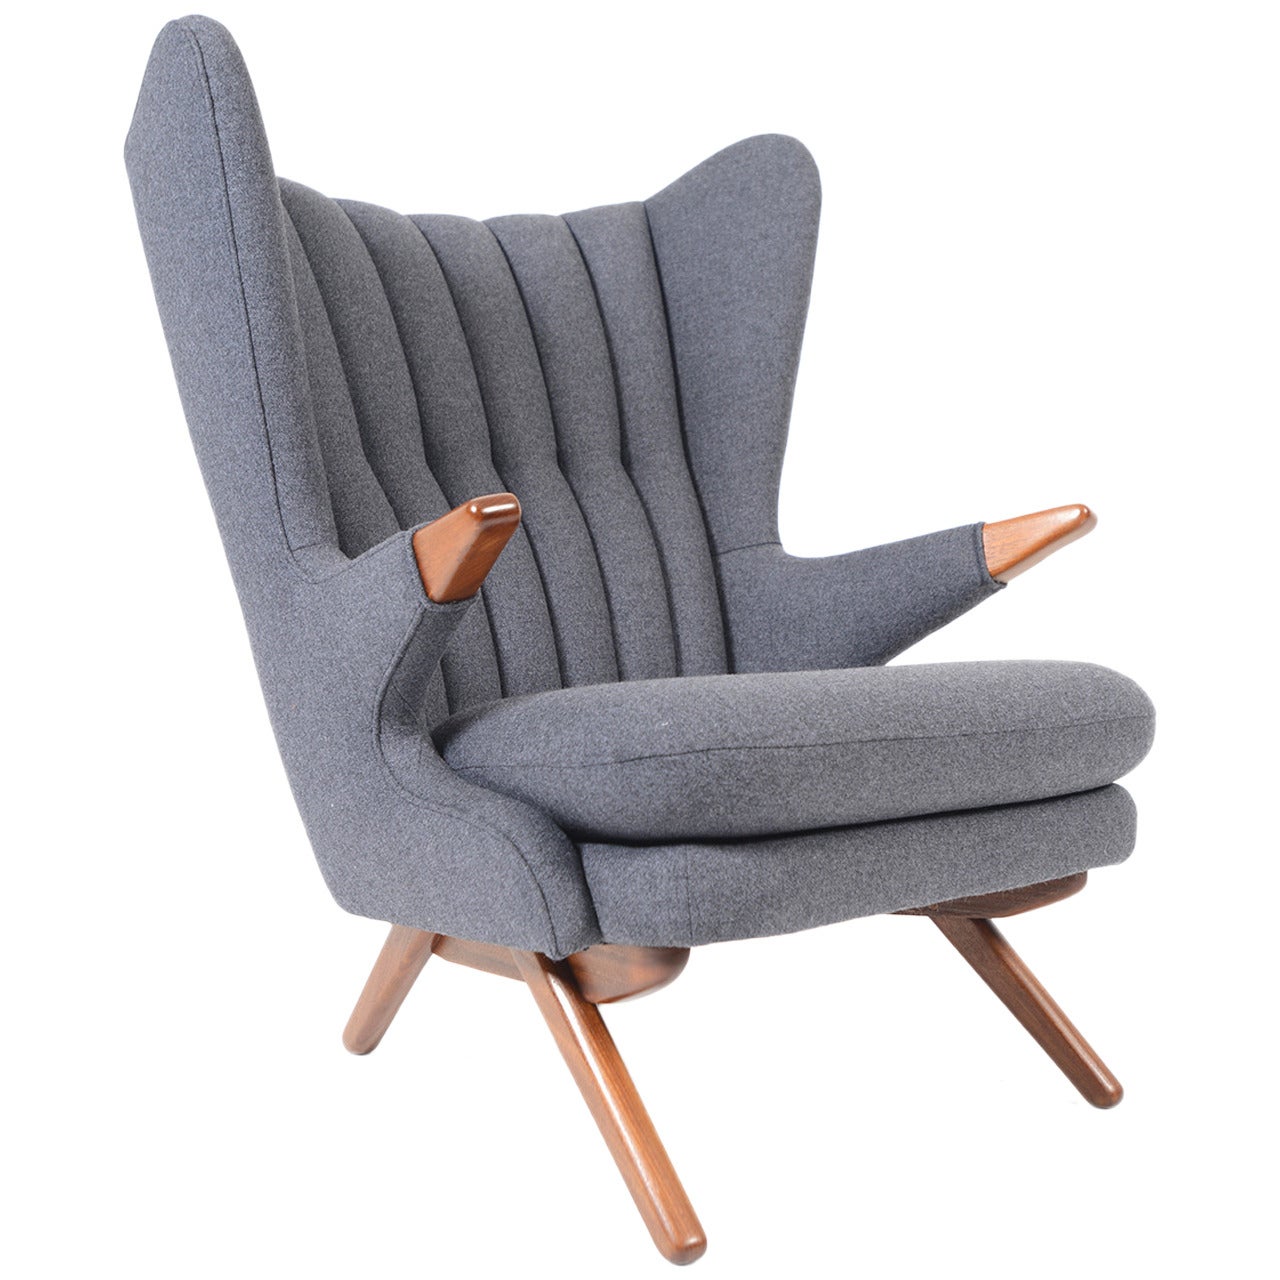 Svend Skipper Model 91 Lounge Chair in Taupe Wool